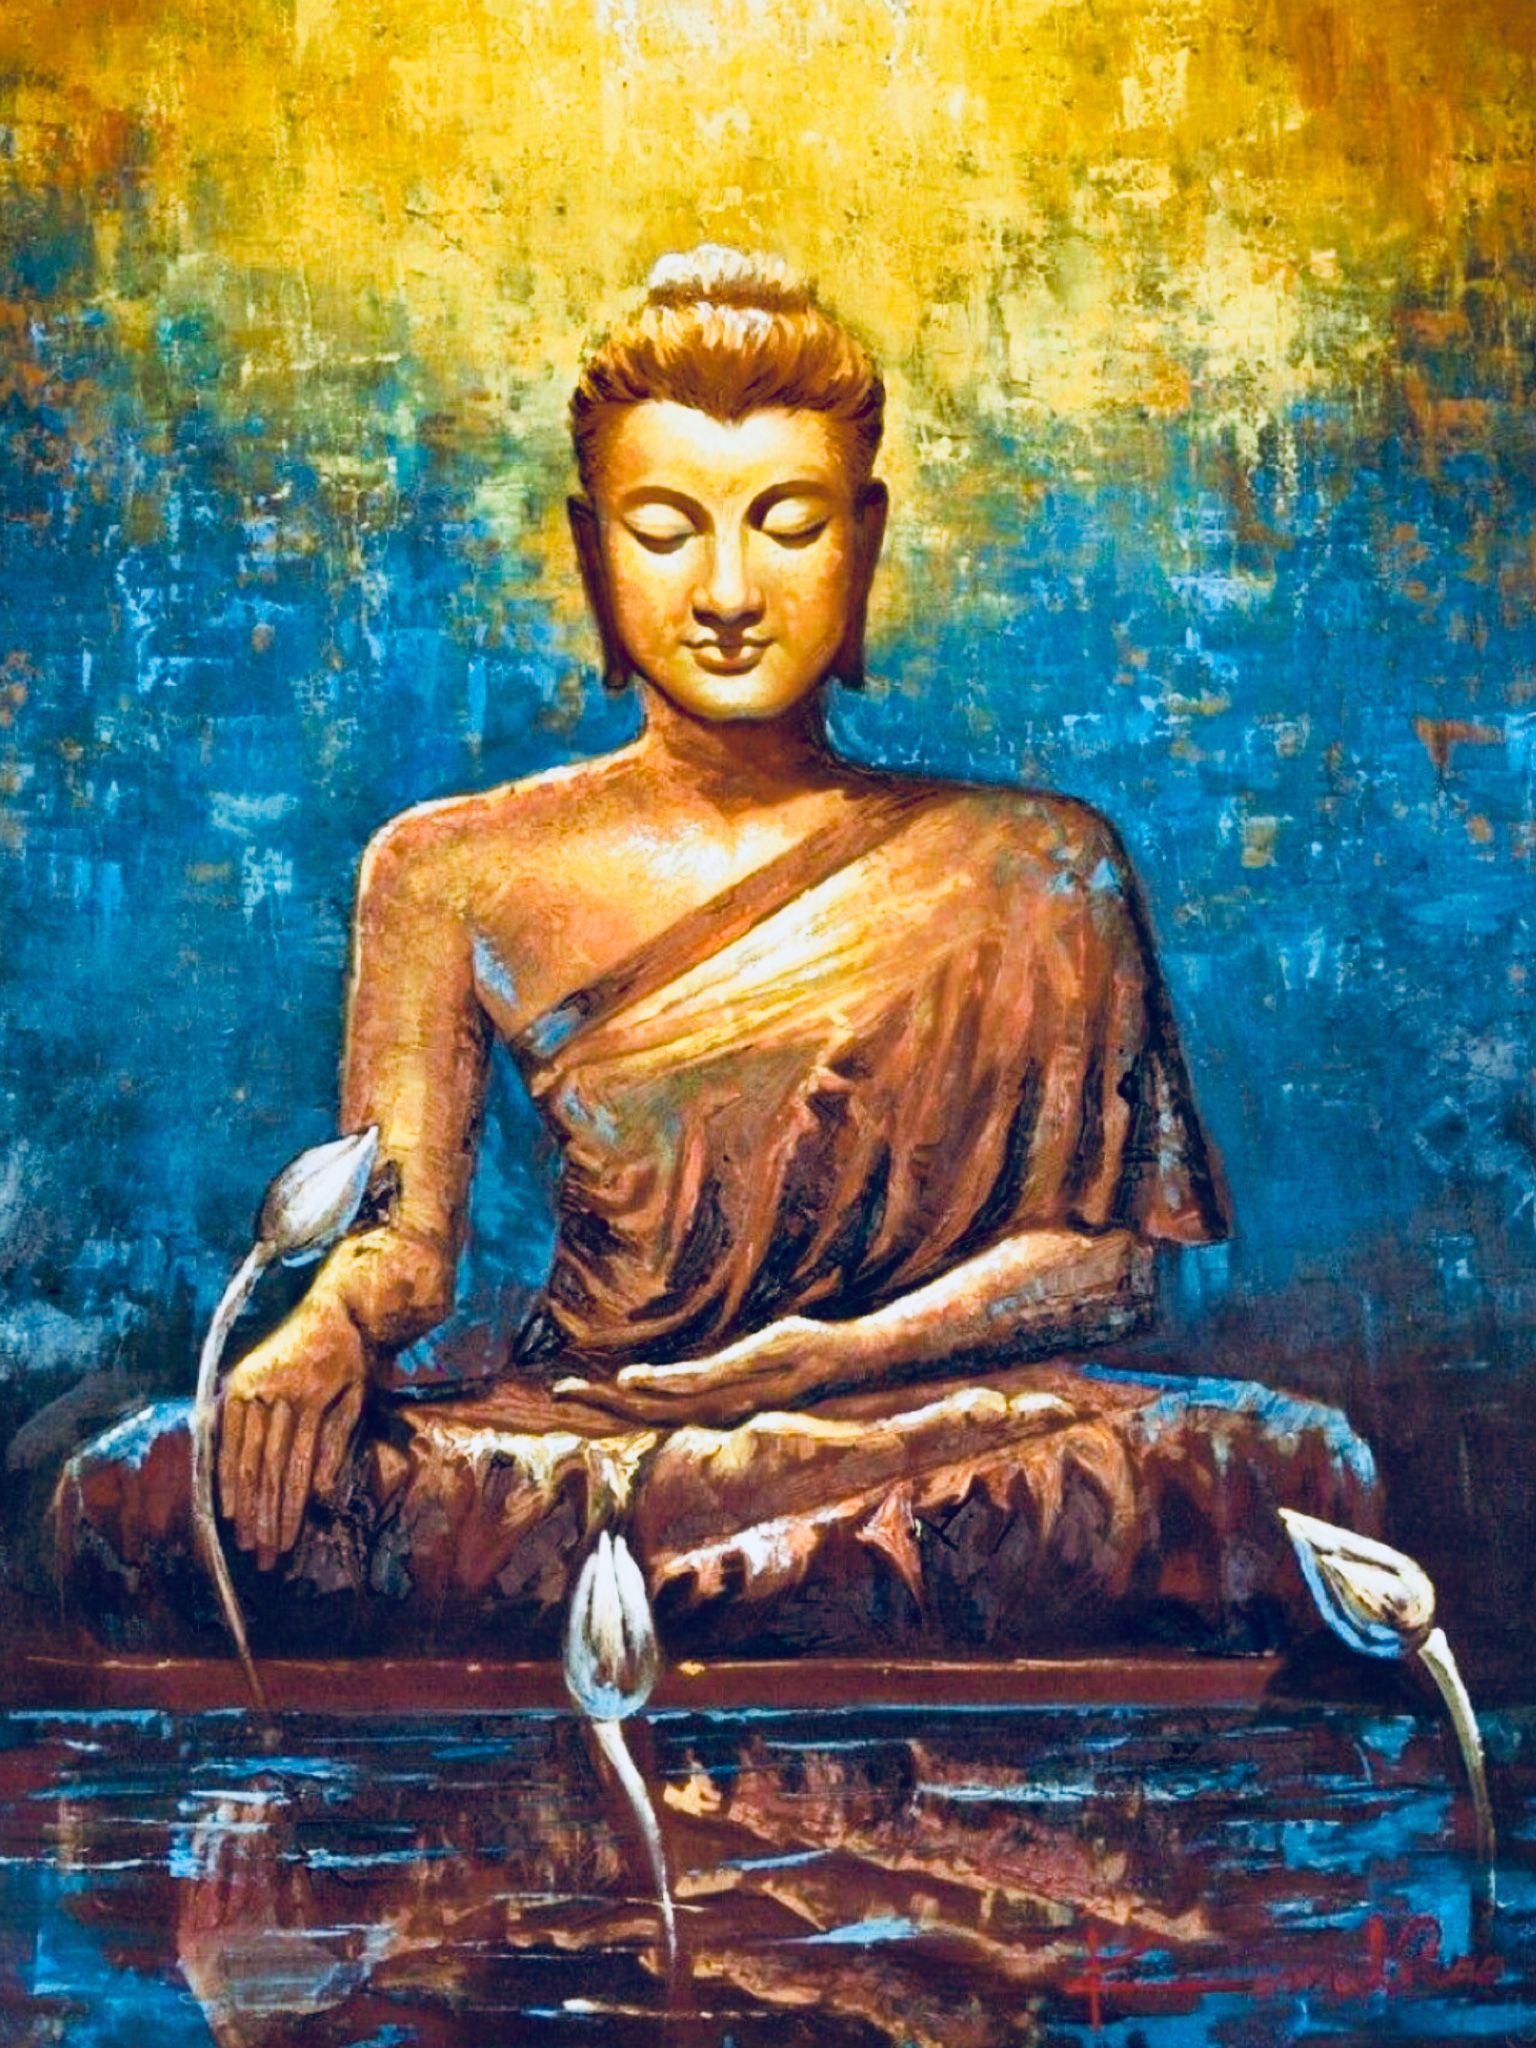 Happy Buddha Painting Wallpapers